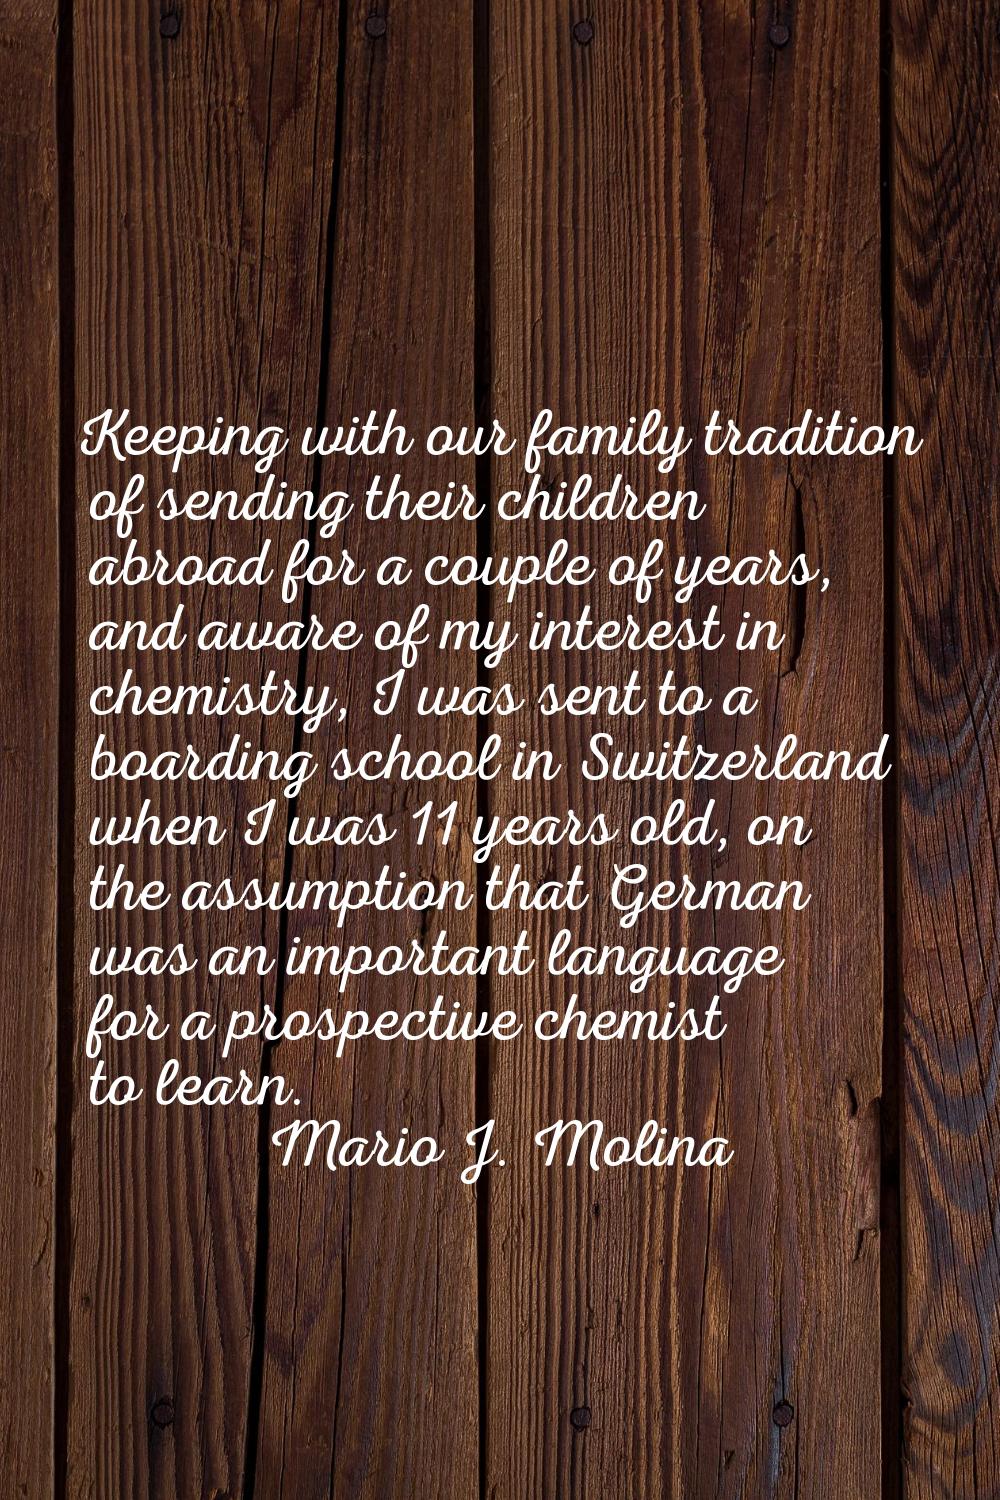 Keeping with our family tradition of sending their children abroad for a couple of years, and aware